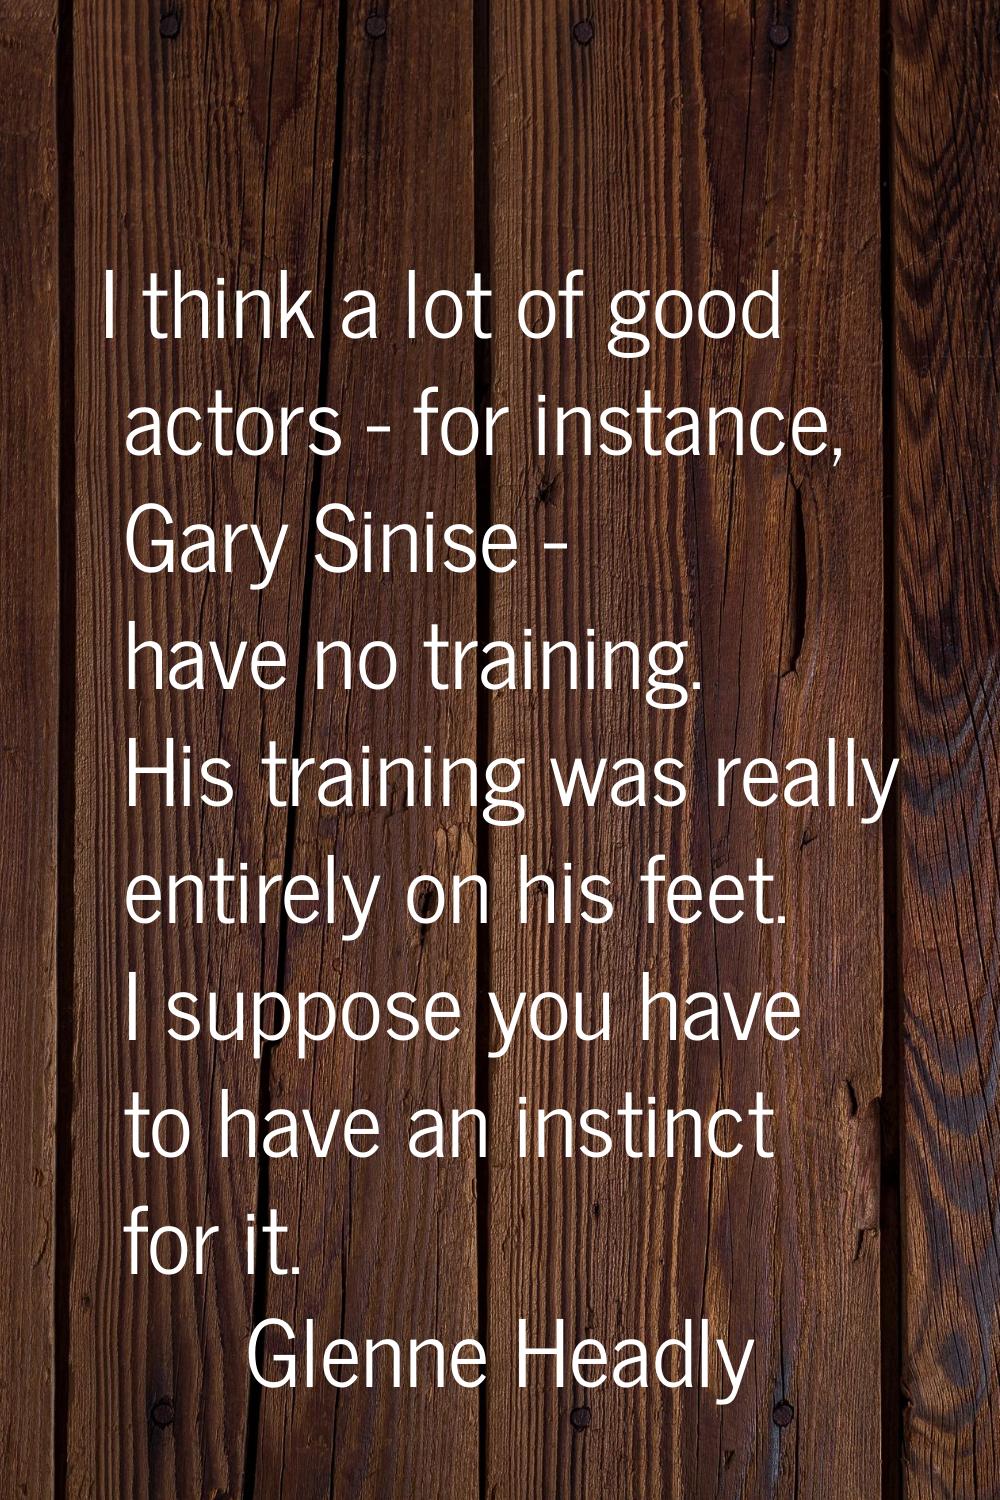 I think a lot of good actors - for instance, Gary Sinise - have no training. His training was reall